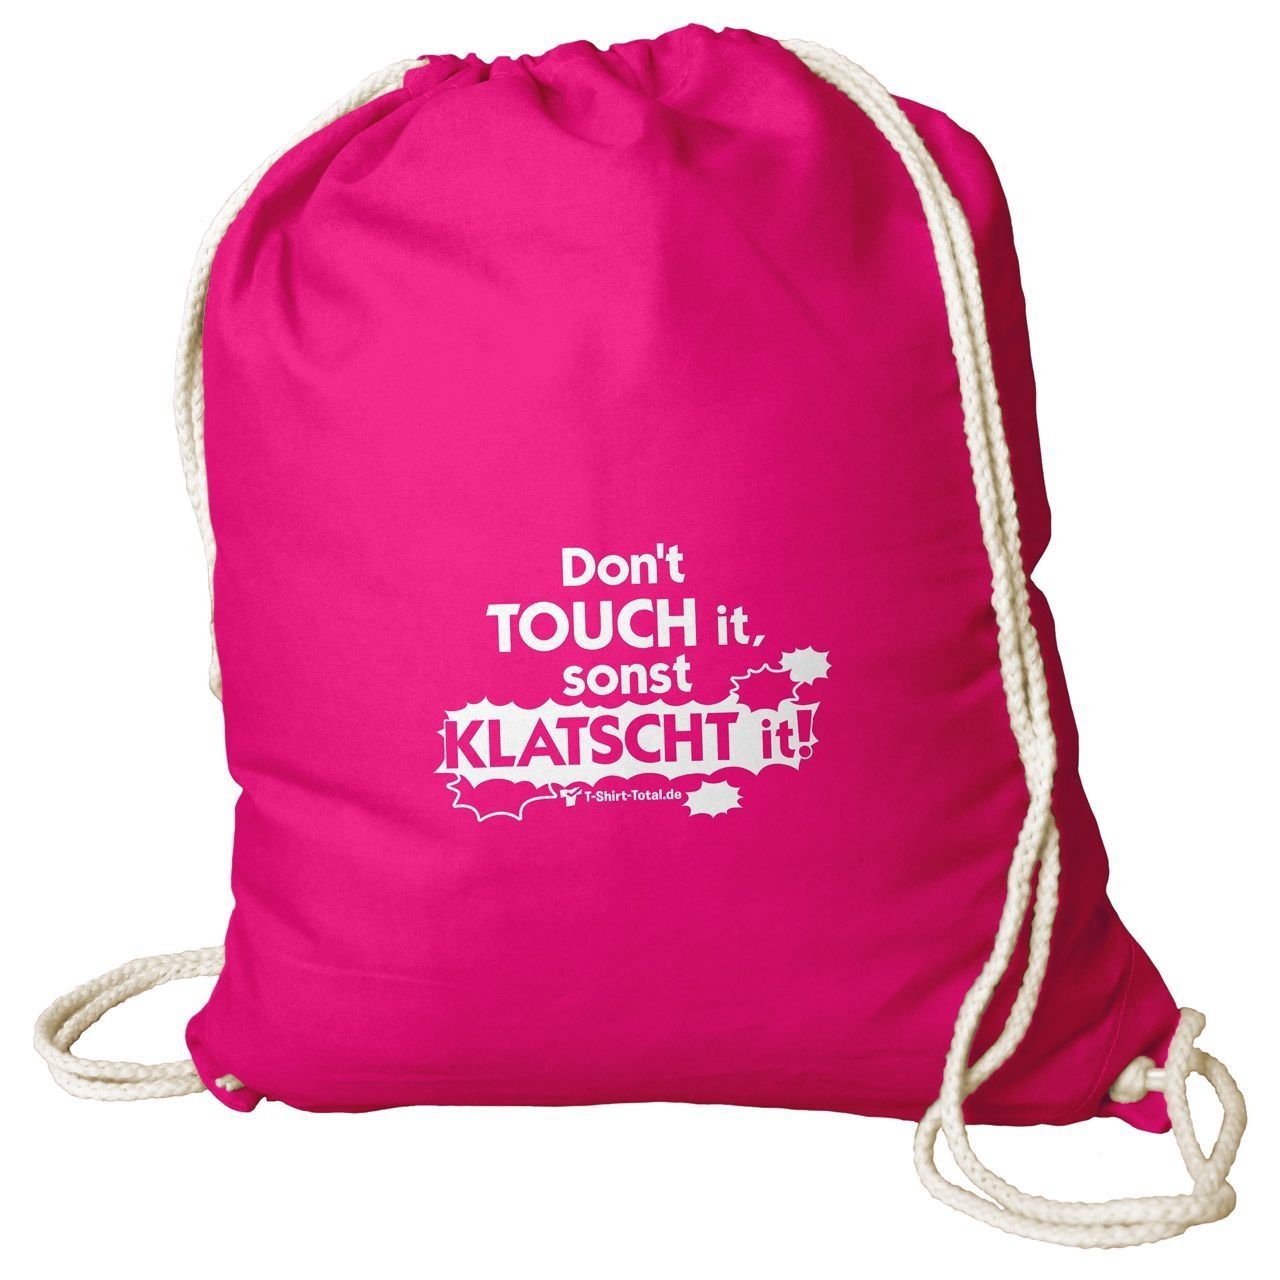 Dont touch it Rucksack Beutel pink